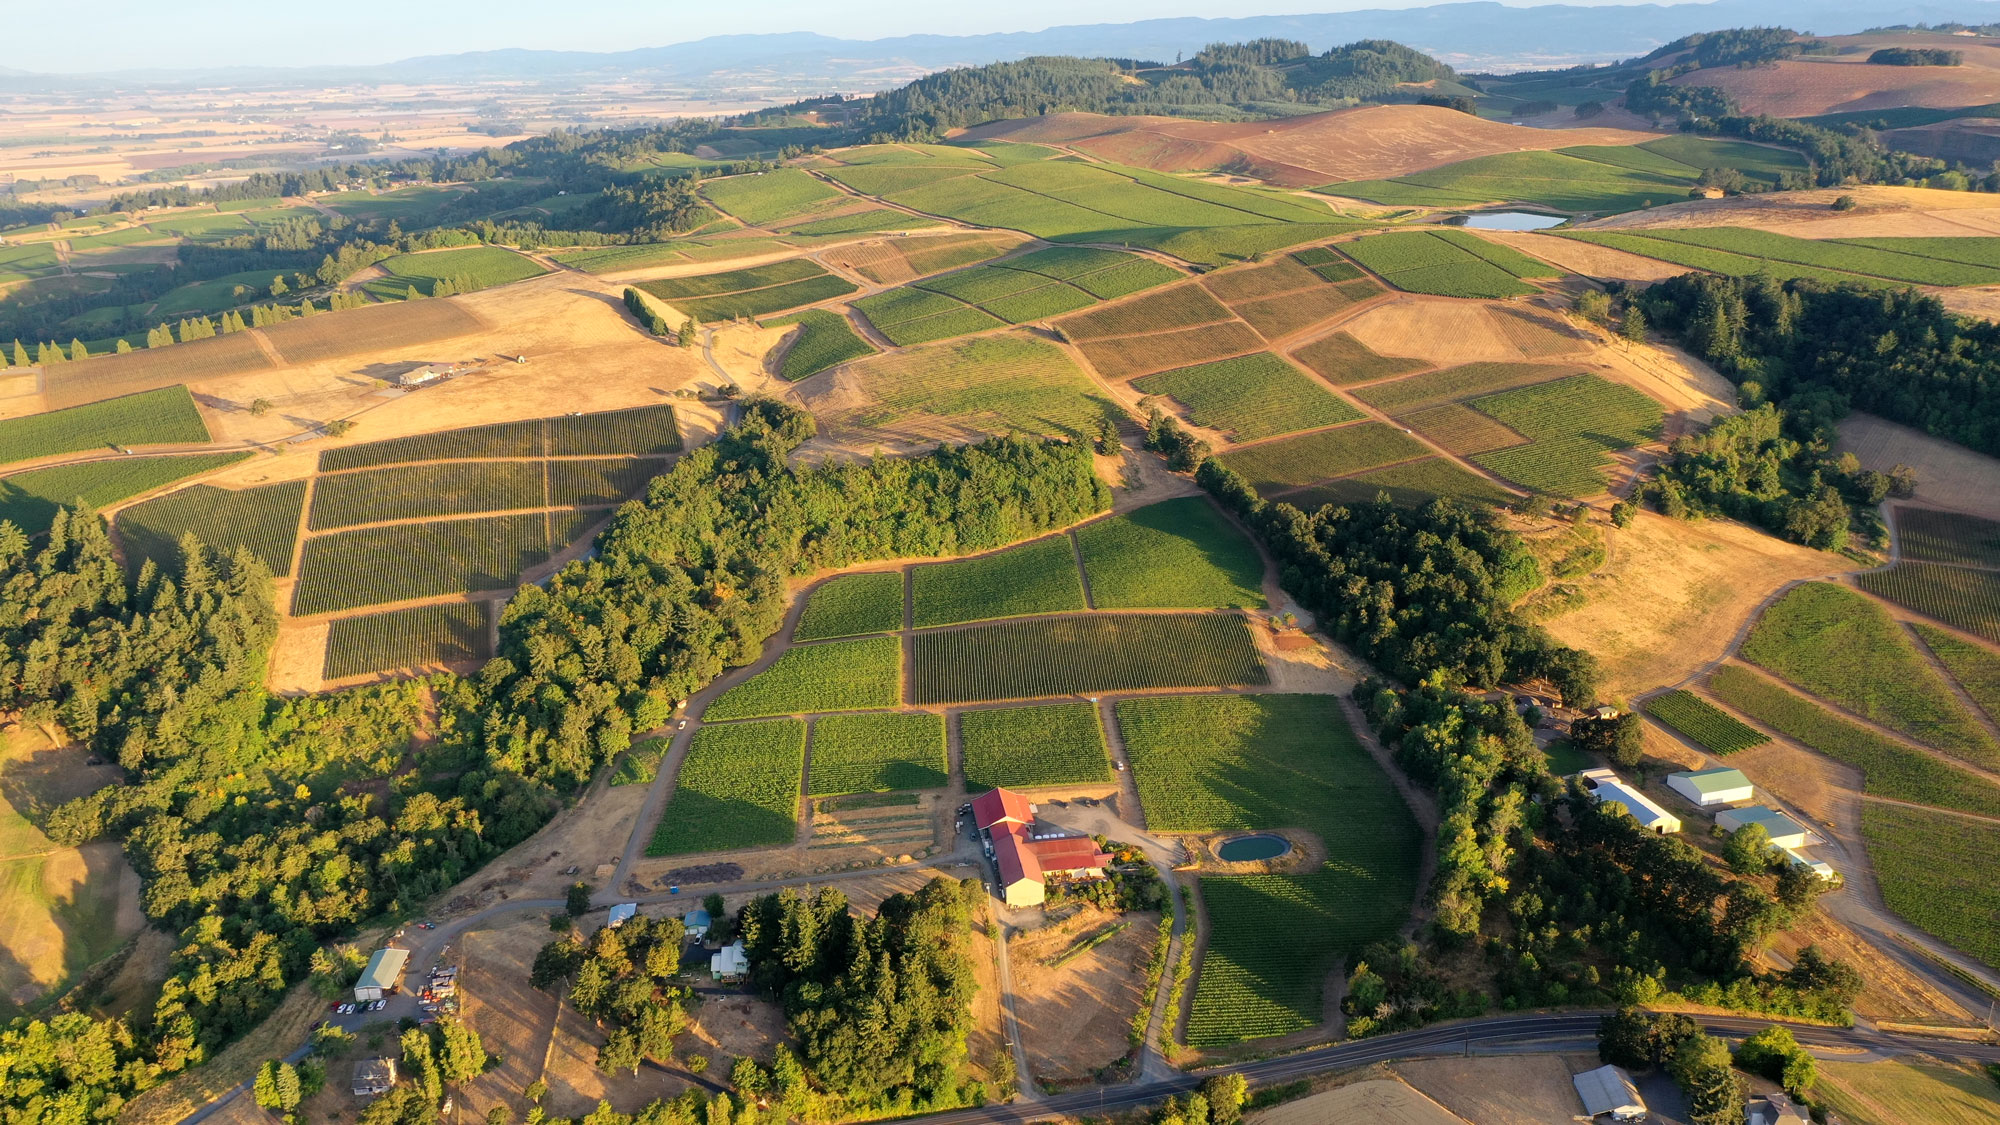 Cristom vineyards from the air